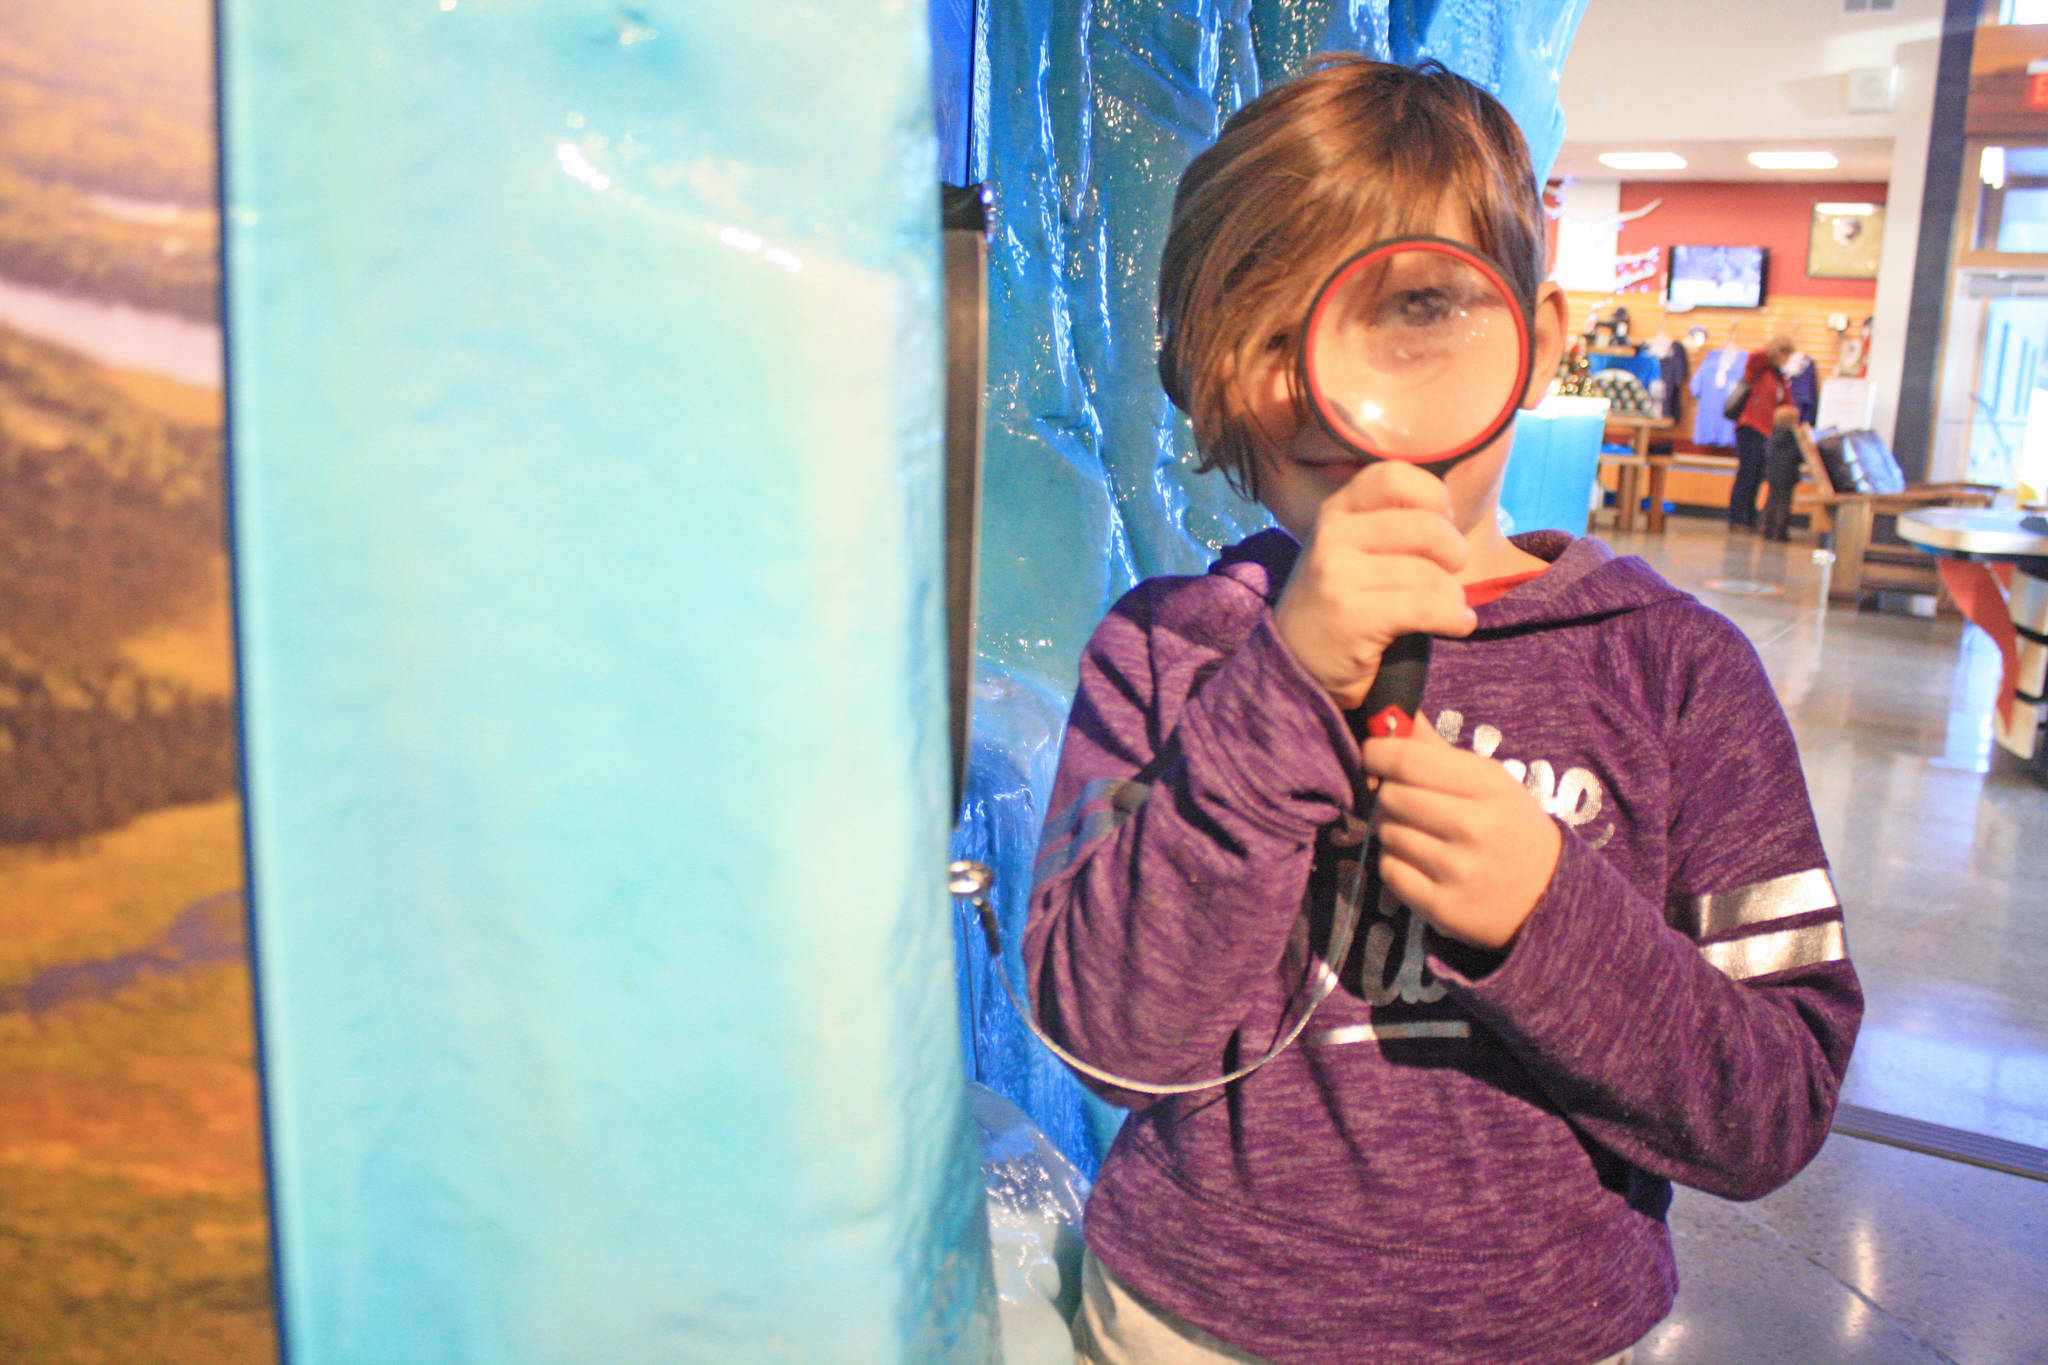 Alexandra Stoaks, 8, peers through a magnifying glass featured in one of the exhibits at the Kenai National Wildlife Refuge Visitor Center. Stoaks and her family attended the Dec. 27 Winter Break Family Fun Day at the center. The visitor center hosts community events throughout the year, including weekly winter walks and film screenings. (Photo by Erin Thompson/Peninsula Clarion)